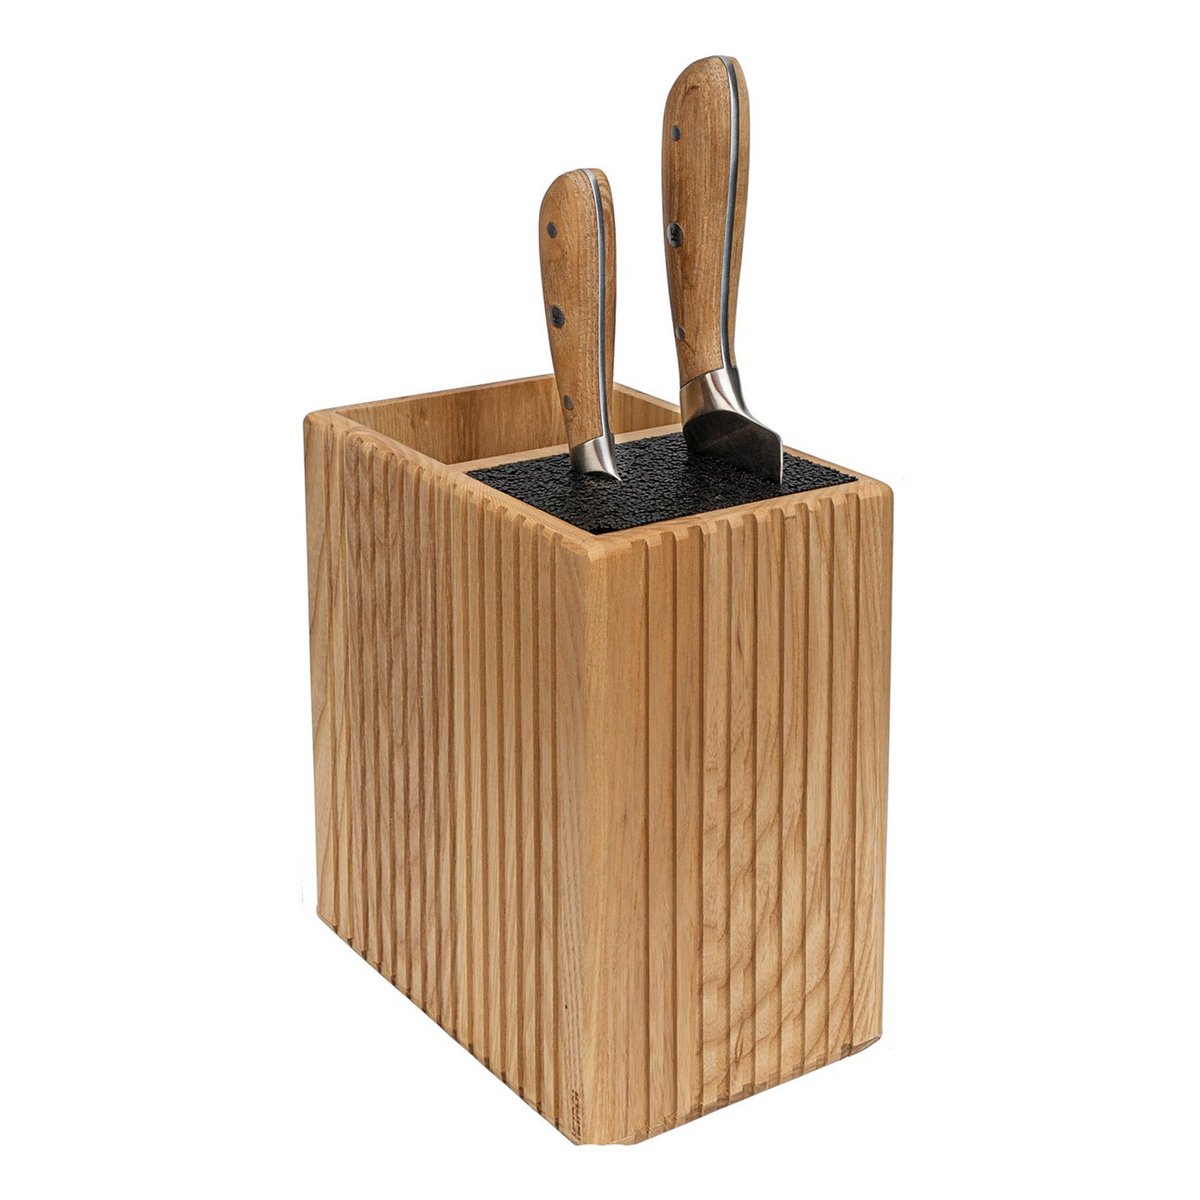 In-drawer Bamboo Knife Block Holds 16 Knives Without Pointing up